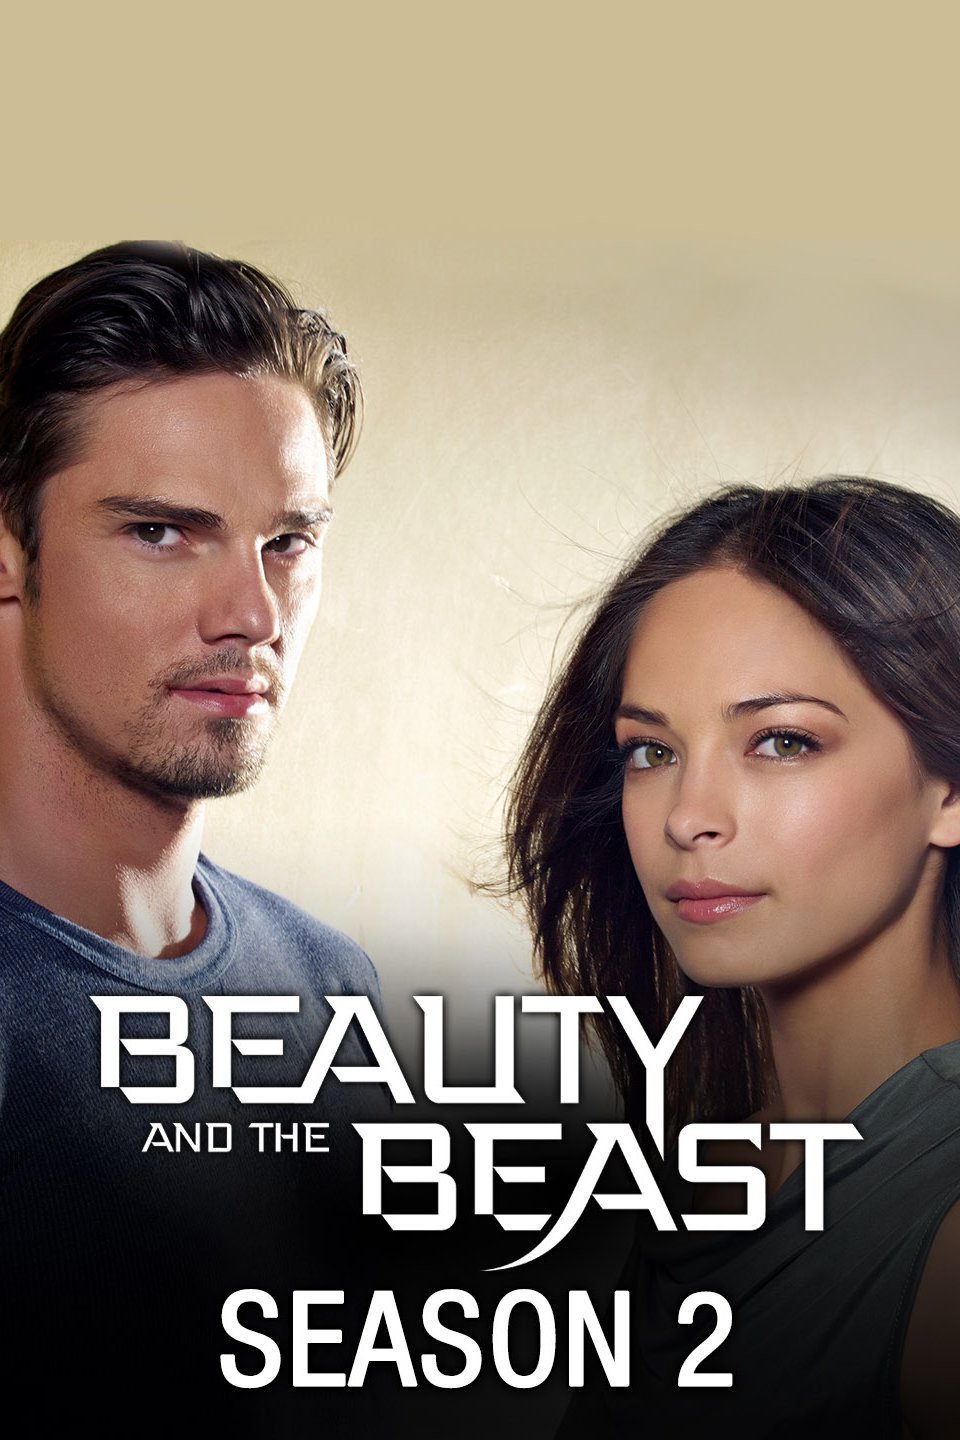 Beauty And the Beast S02 2013 Hindi Dubbed